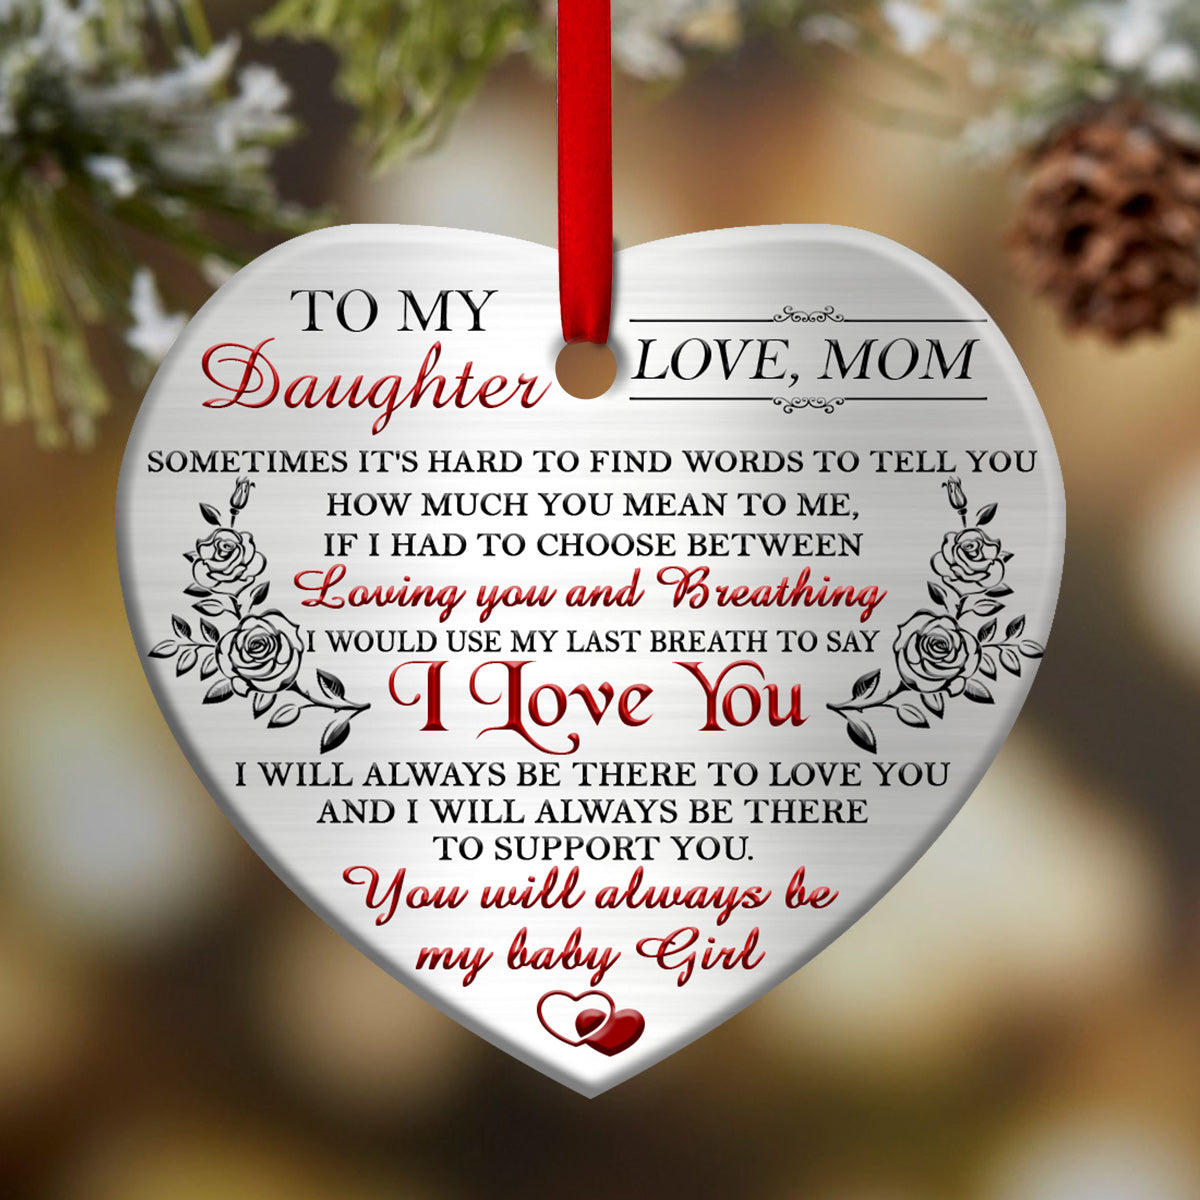 To My Daughter Heart Ceramic Ornament - Christmas Ornament - Christmas Gift